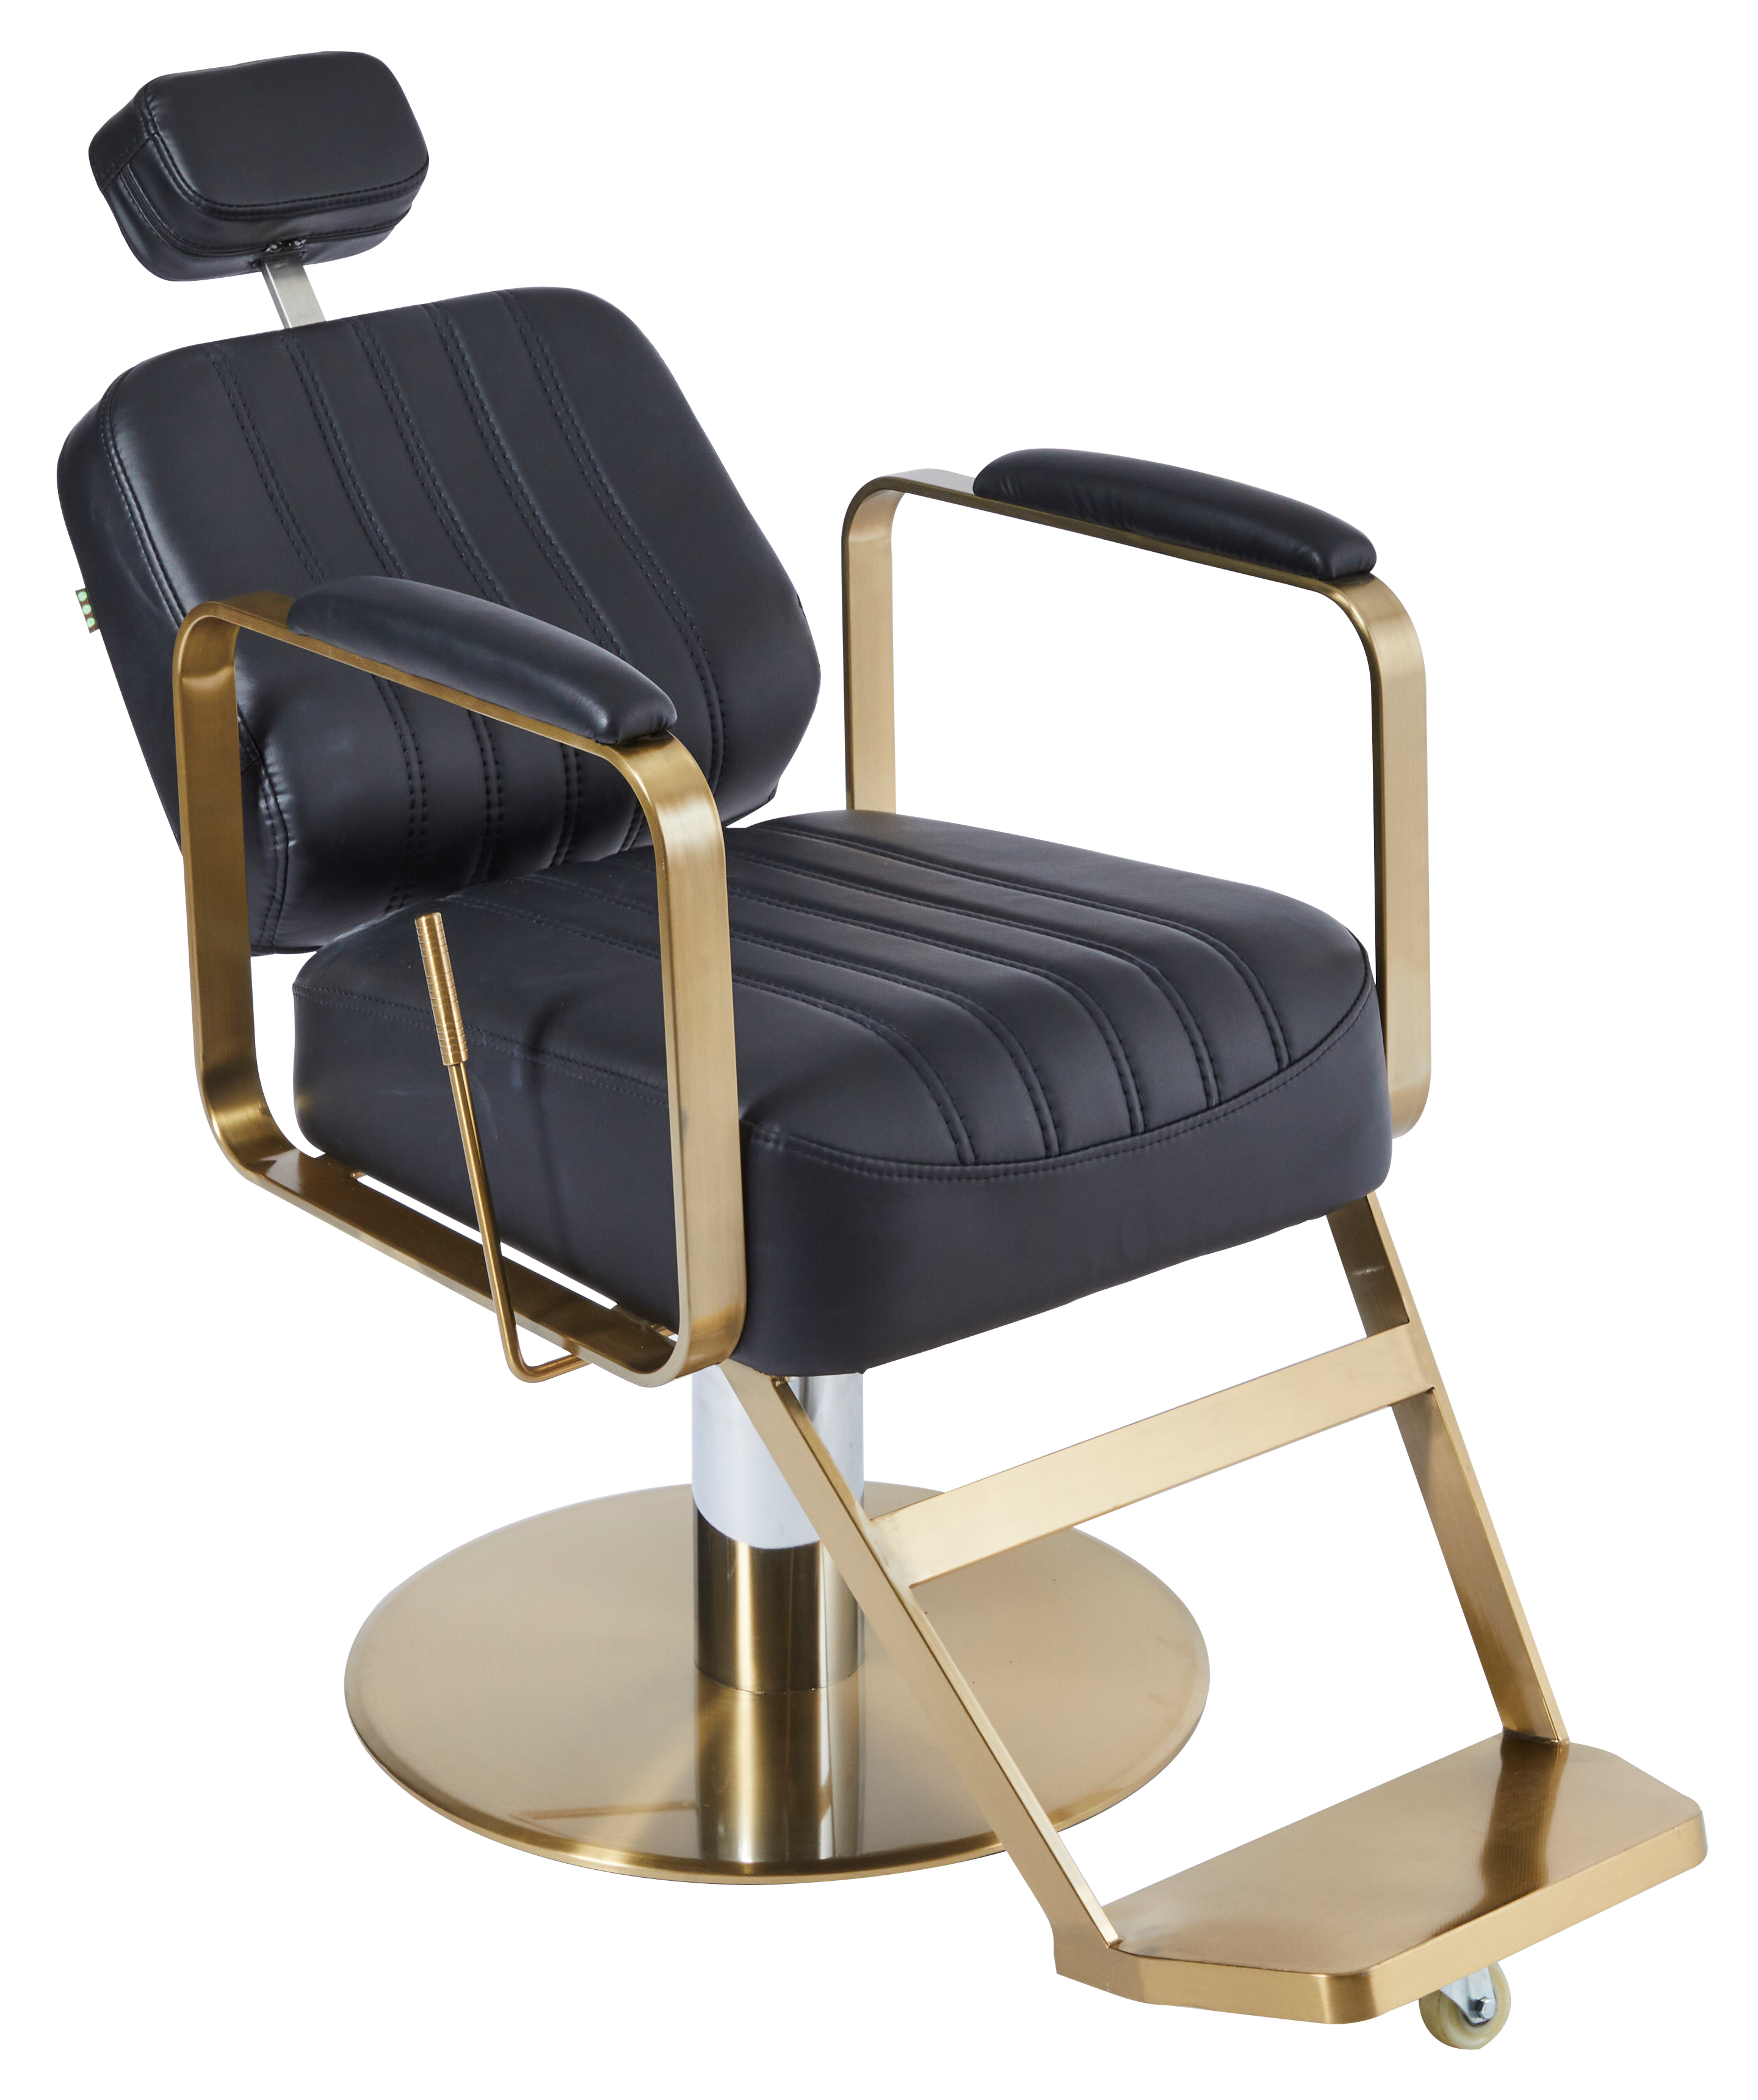 The Lexi Reclining Chair - Black & Gold by BEC